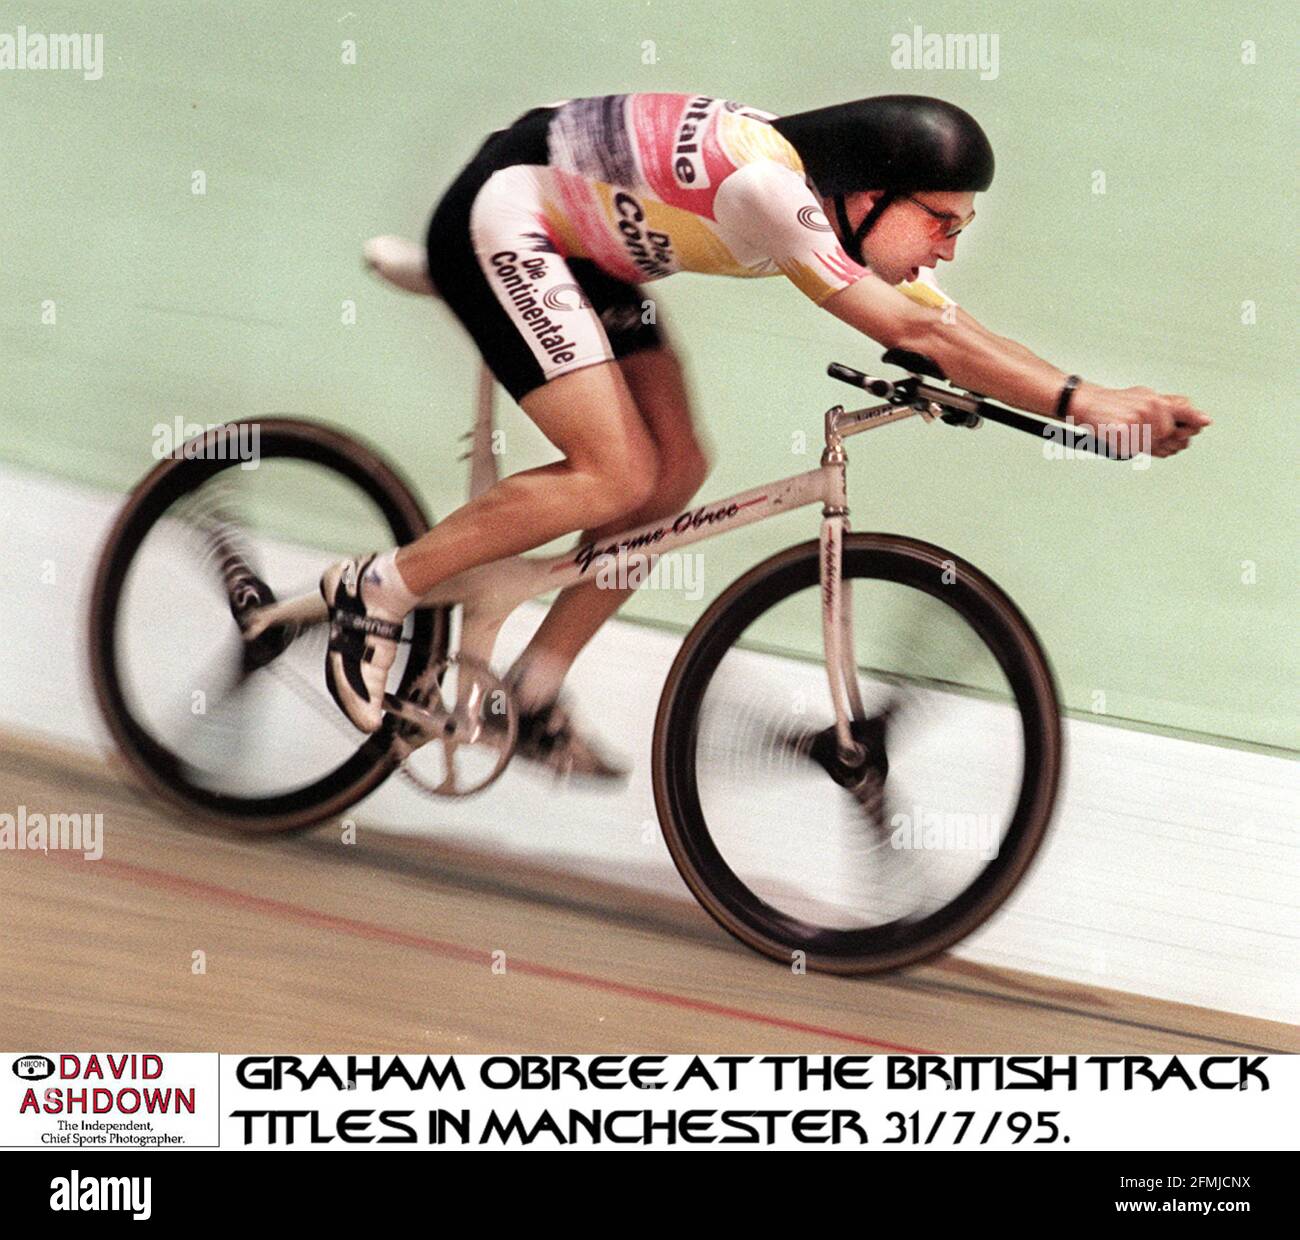 Graham Orbree Cycling at the british track titles in manchester Stock Photo